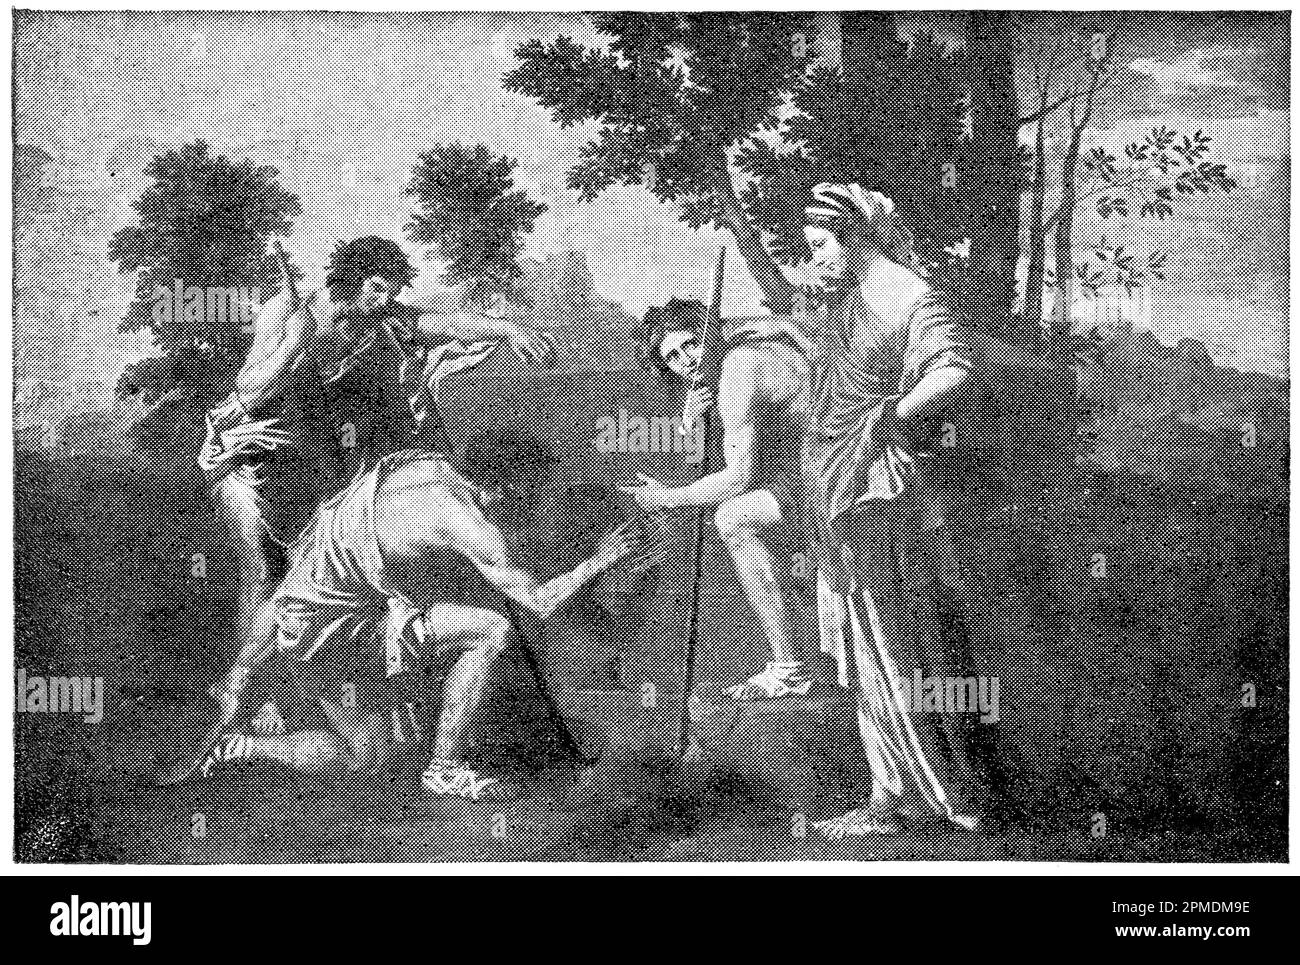 Et in Arcadia ego (The Shepherds of Arcadia) by a French painter Nicolas Poussin. Publication of the book 'Meyers Konversations-Lexikon', Volume 2, Leipzig, Germany, 1910 Stock Photo